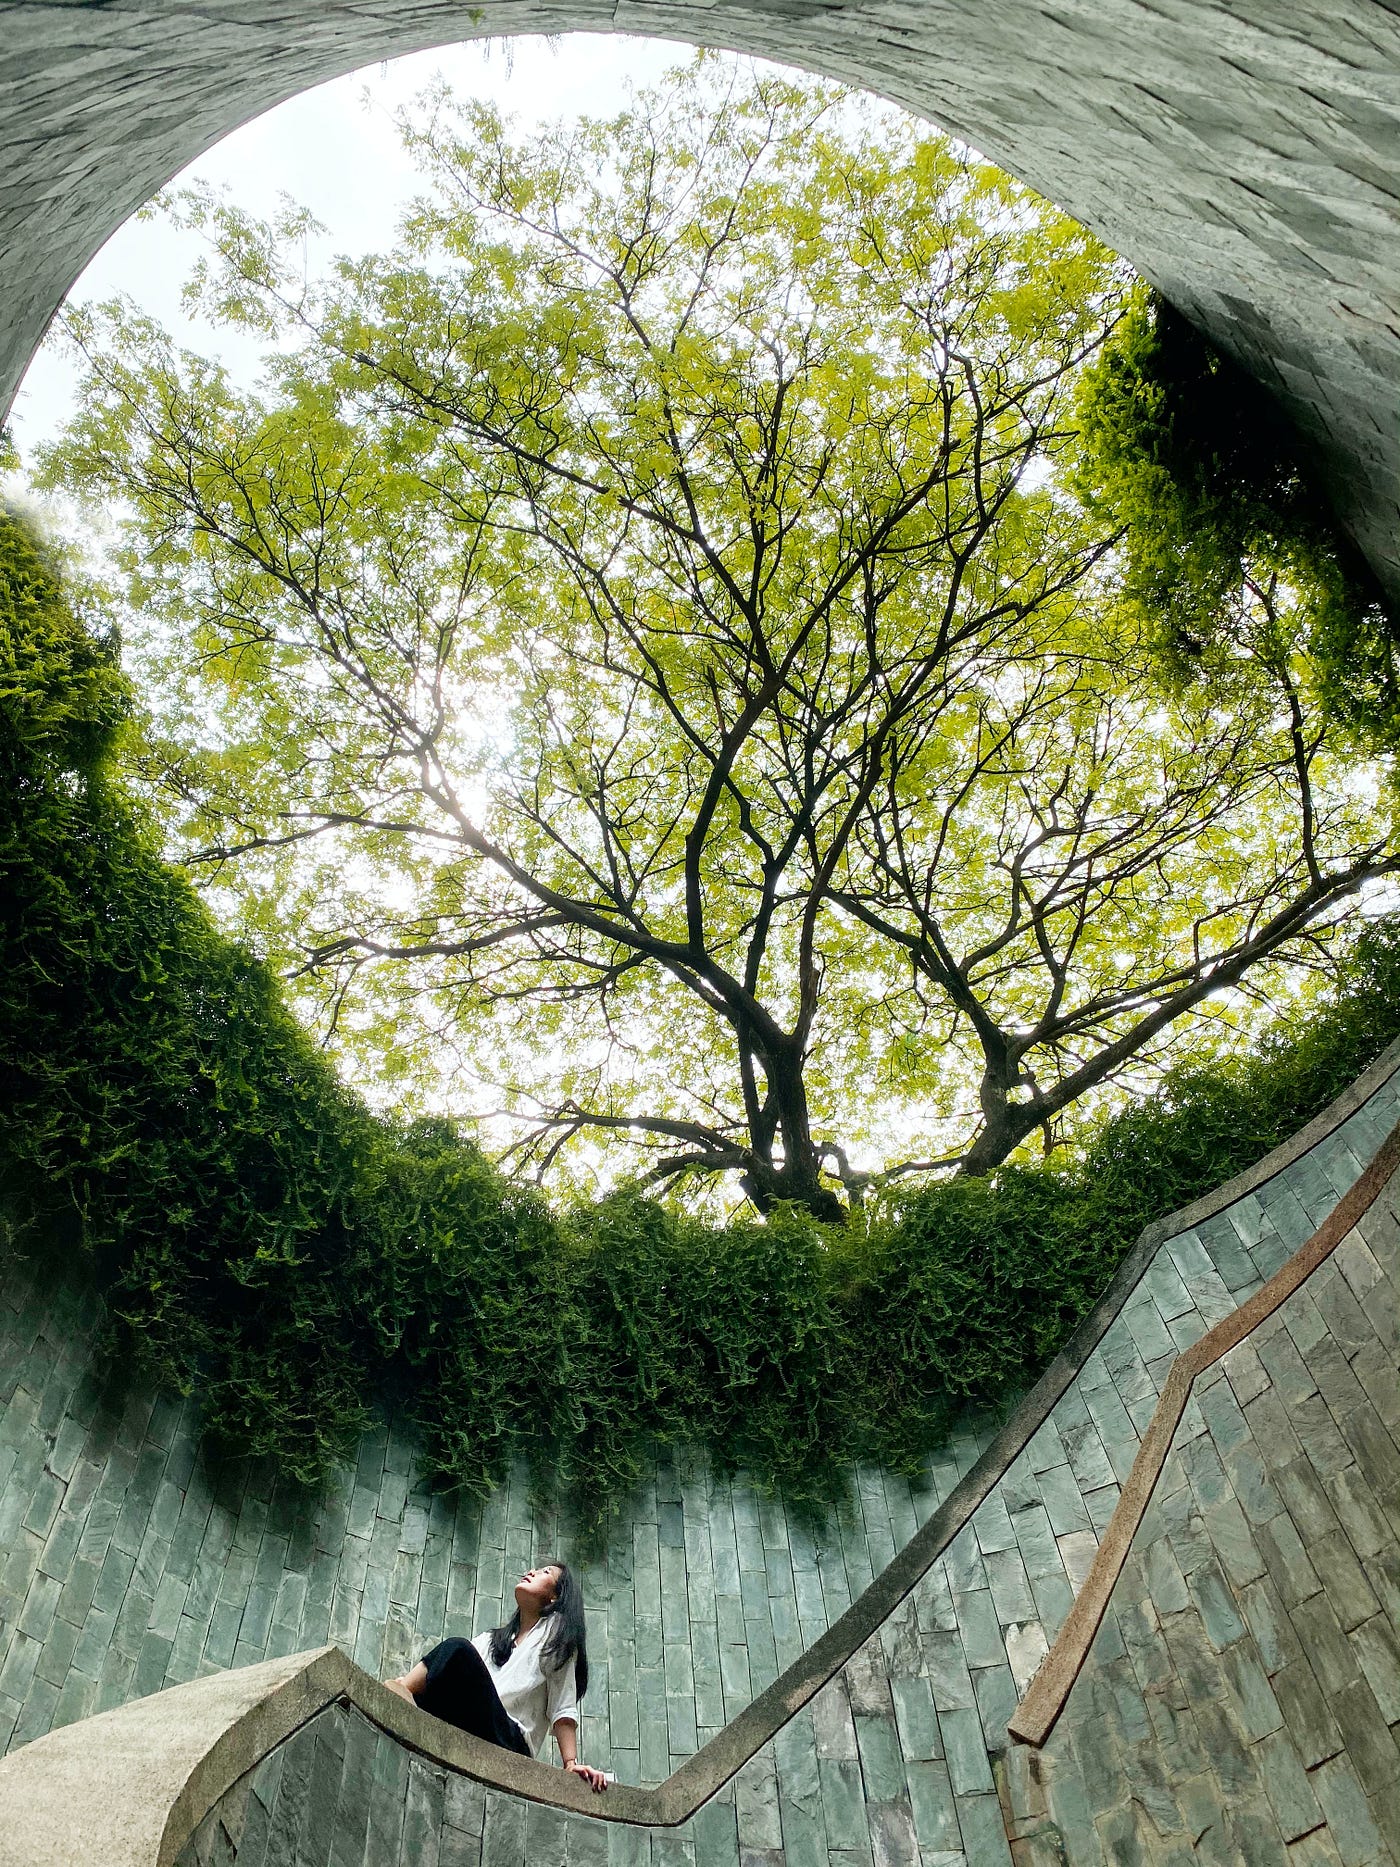 A young feminine-presenting person sits on a outdoor spiral staircase that seems to be below ground level. They stare up above at the ground level where lush ground cover spills over the sides of the staircase and tree canopy appears up in the sky.